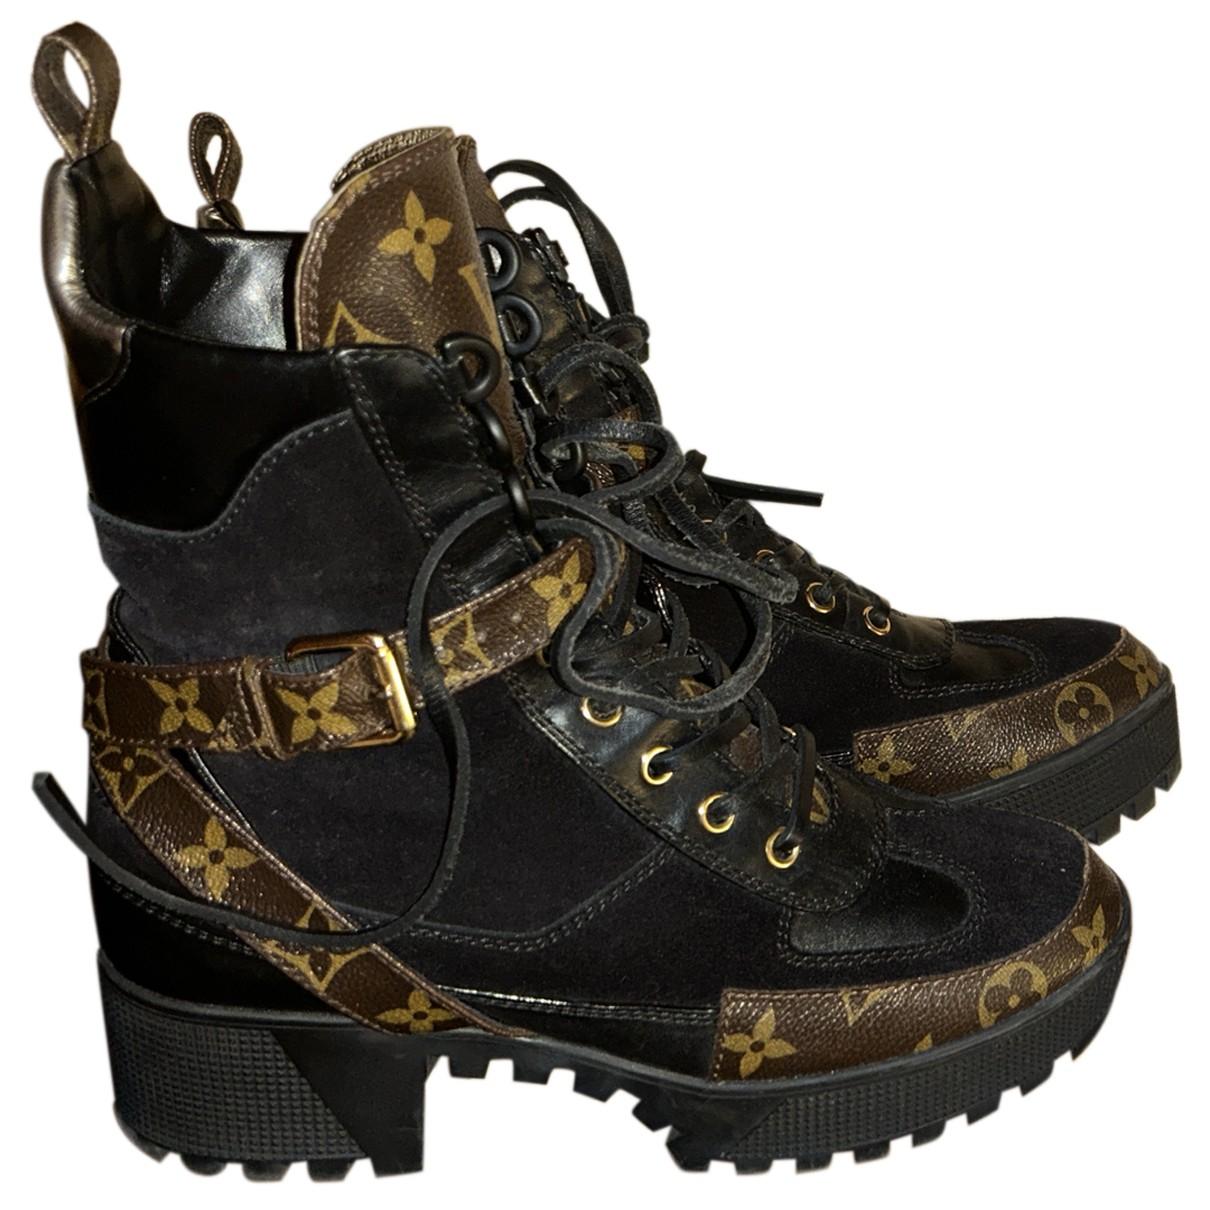 Louis Vuitton Puffy Wedge Lace Up Boots